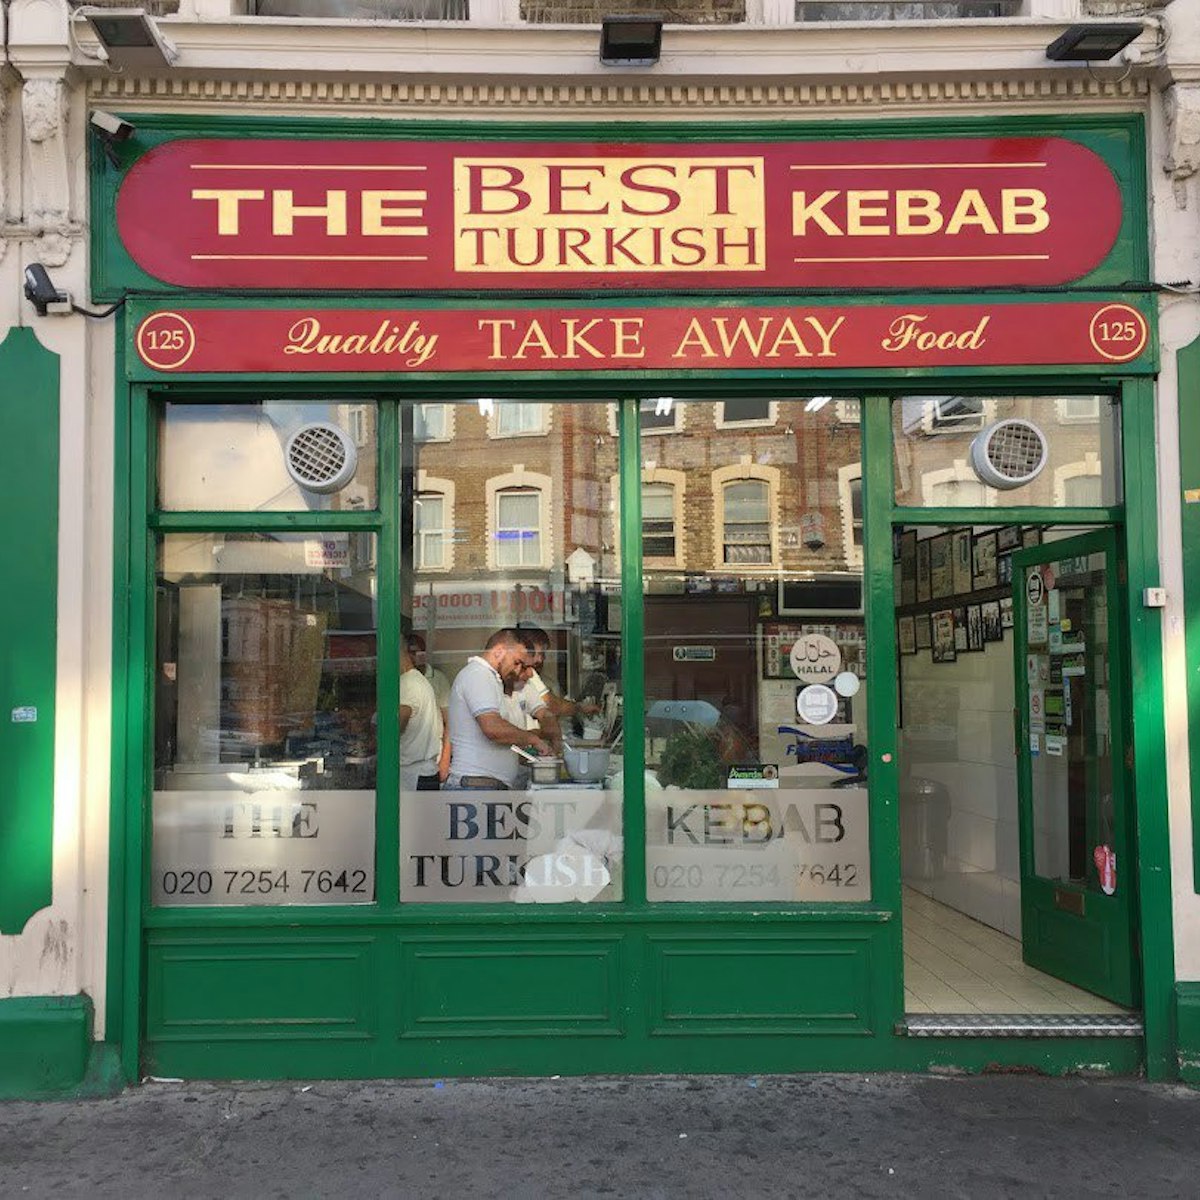 The shopfront of Best Turkish Kebab, a popular fast food joint in Dalston